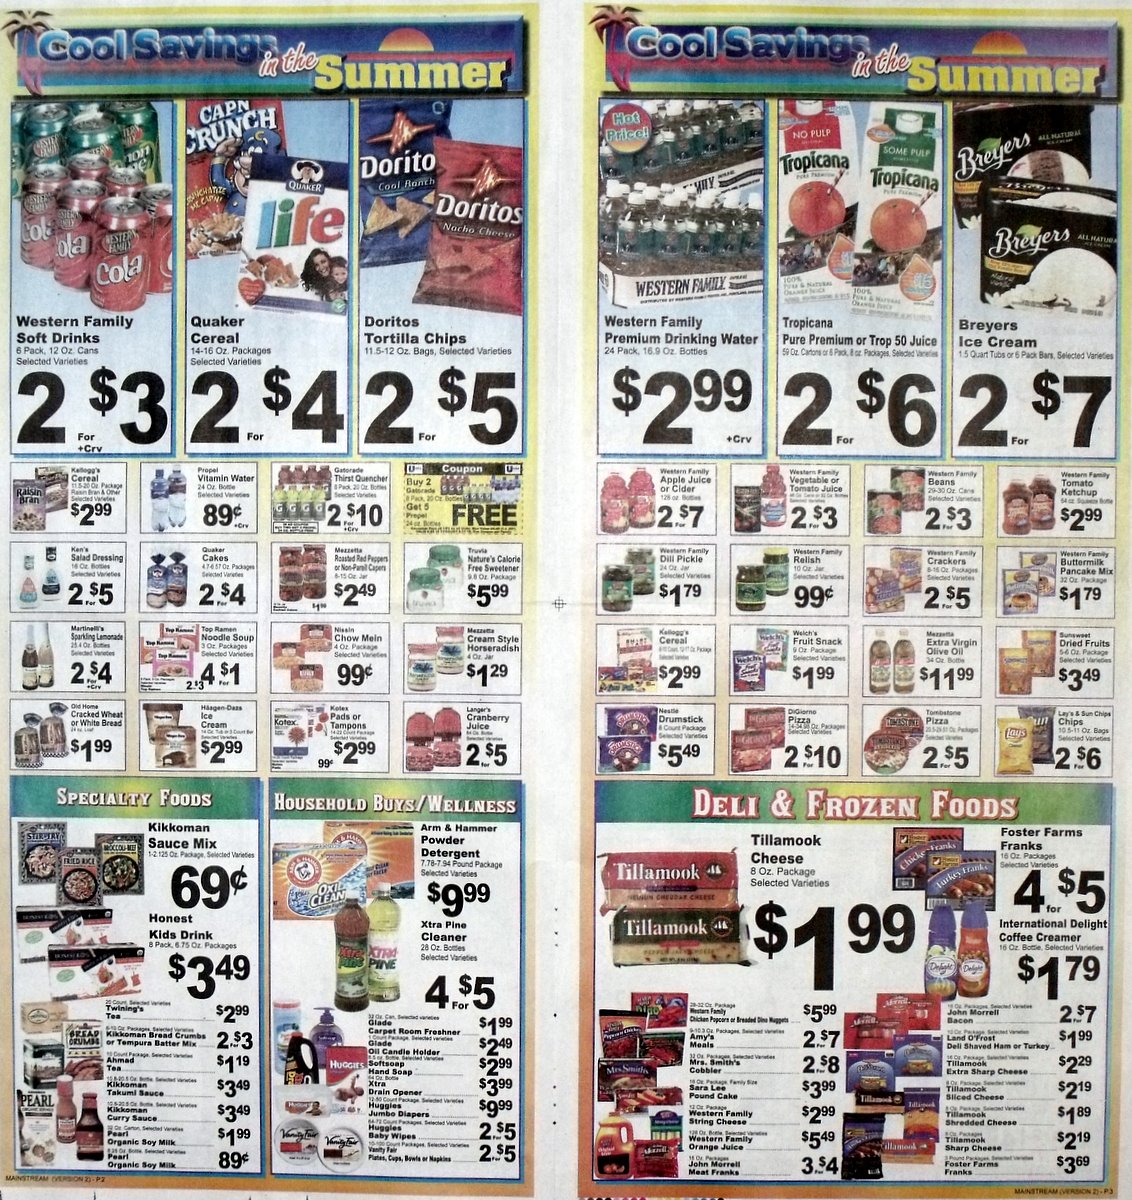 Big Trees Market Weekly Ad for August 25 - August 31, 2010